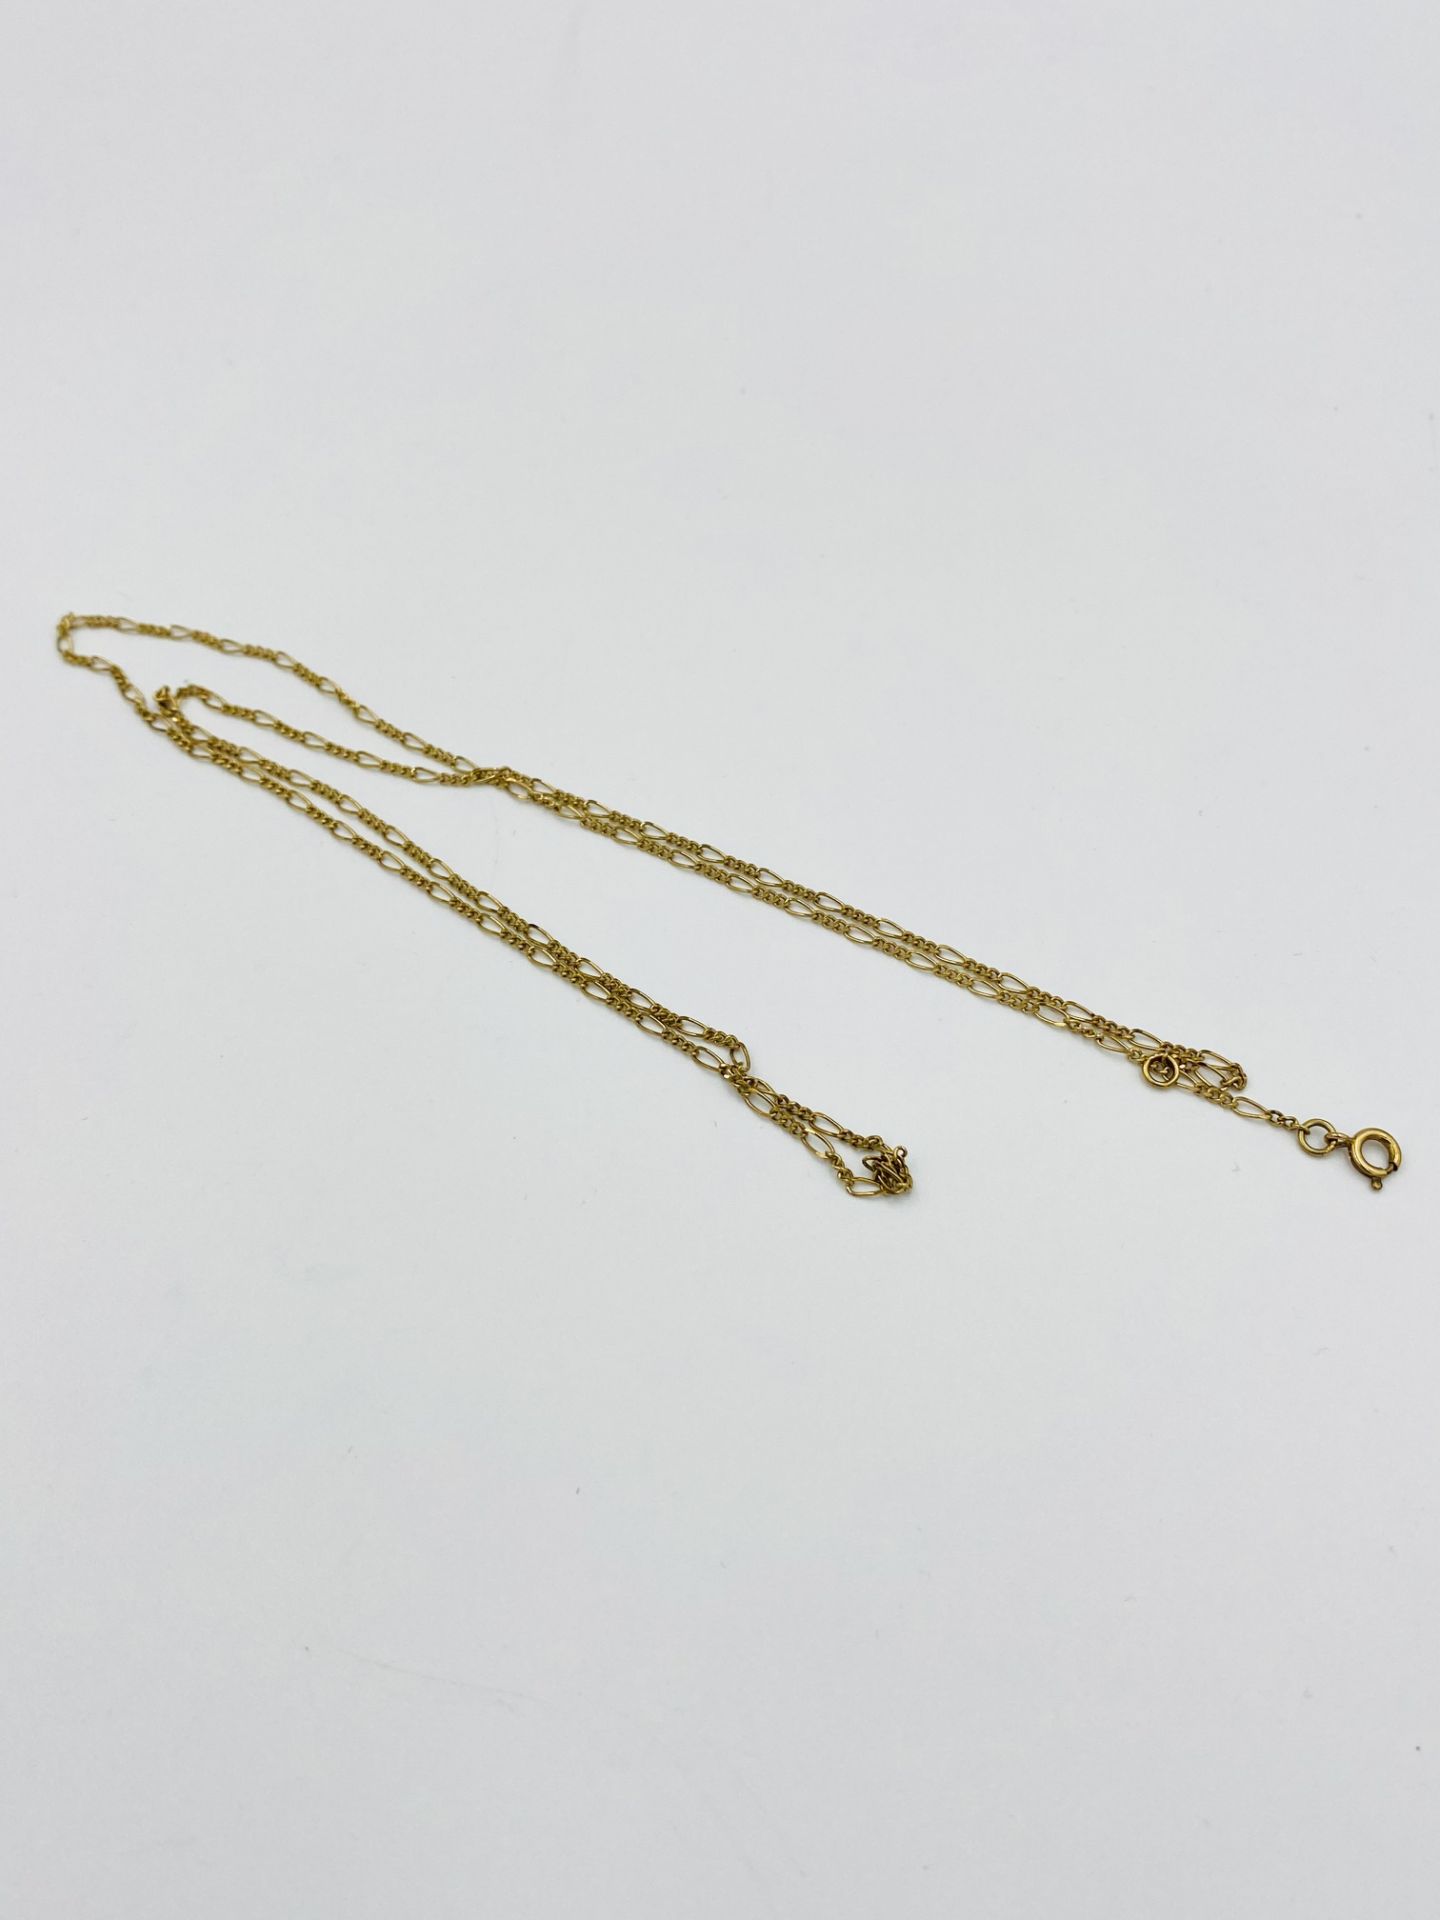 9ct gold link chain - Image 4 of 4